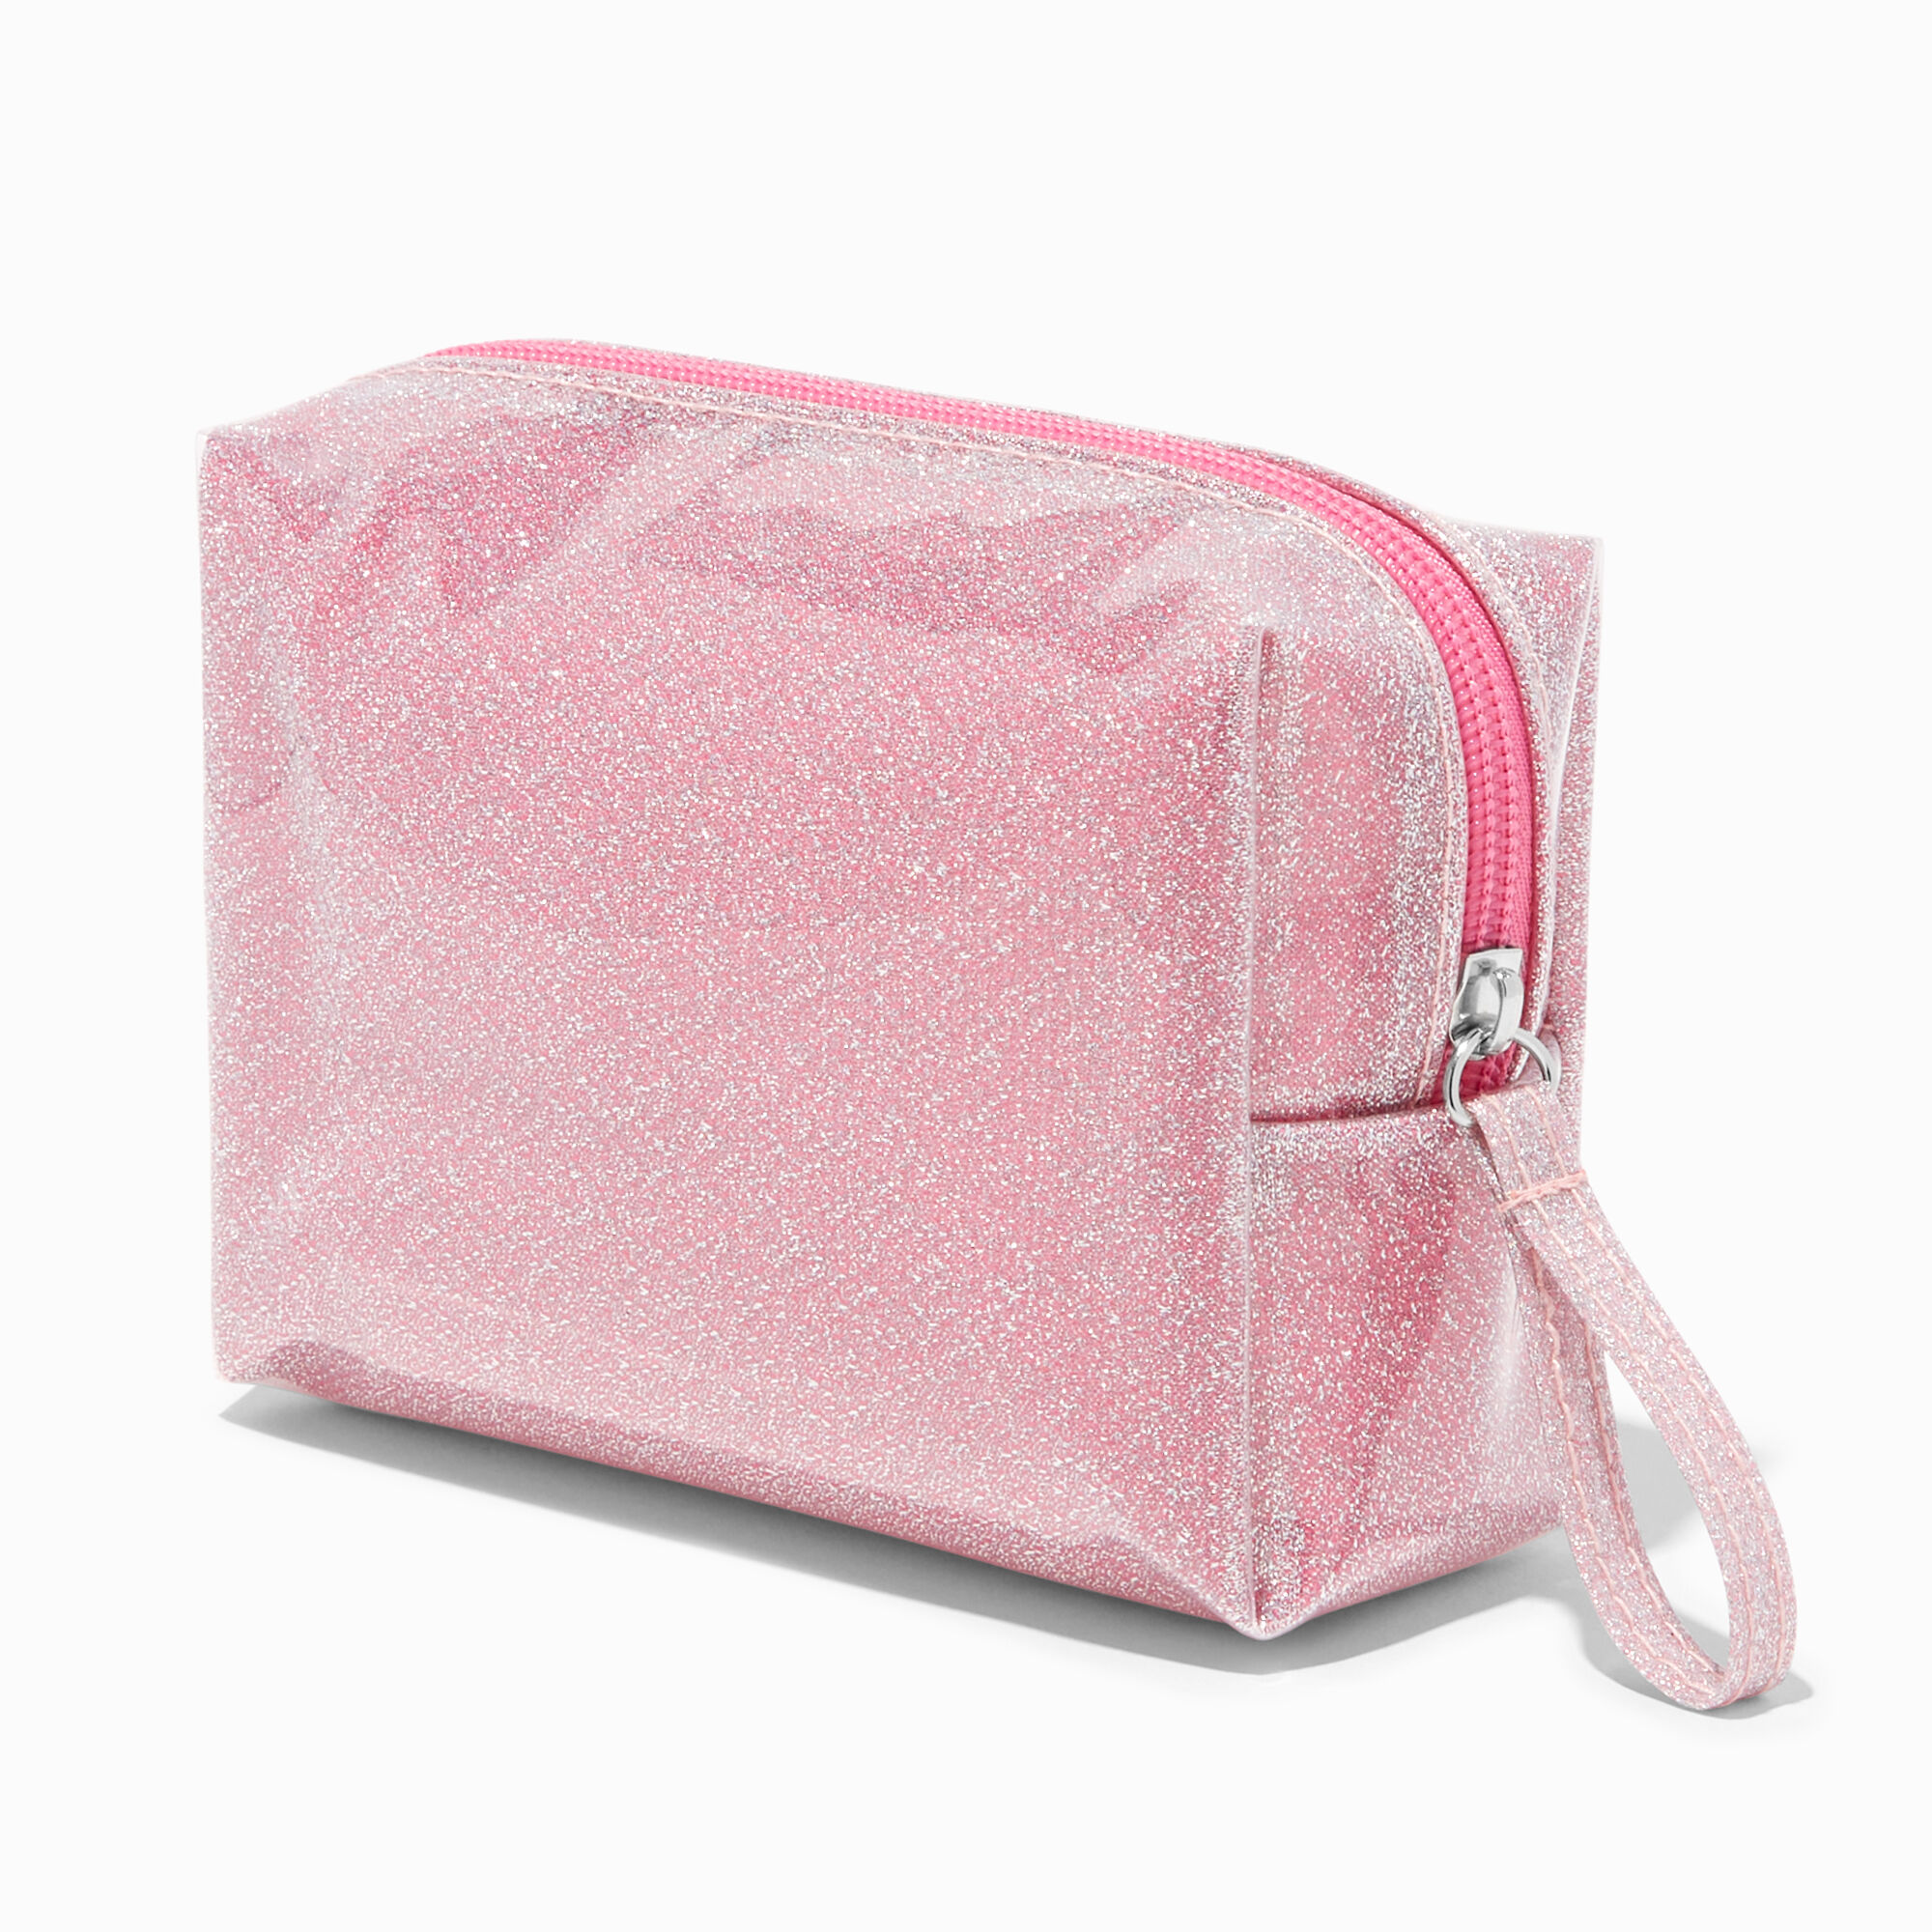 View Claires Glitter Makeup Bag Pink information